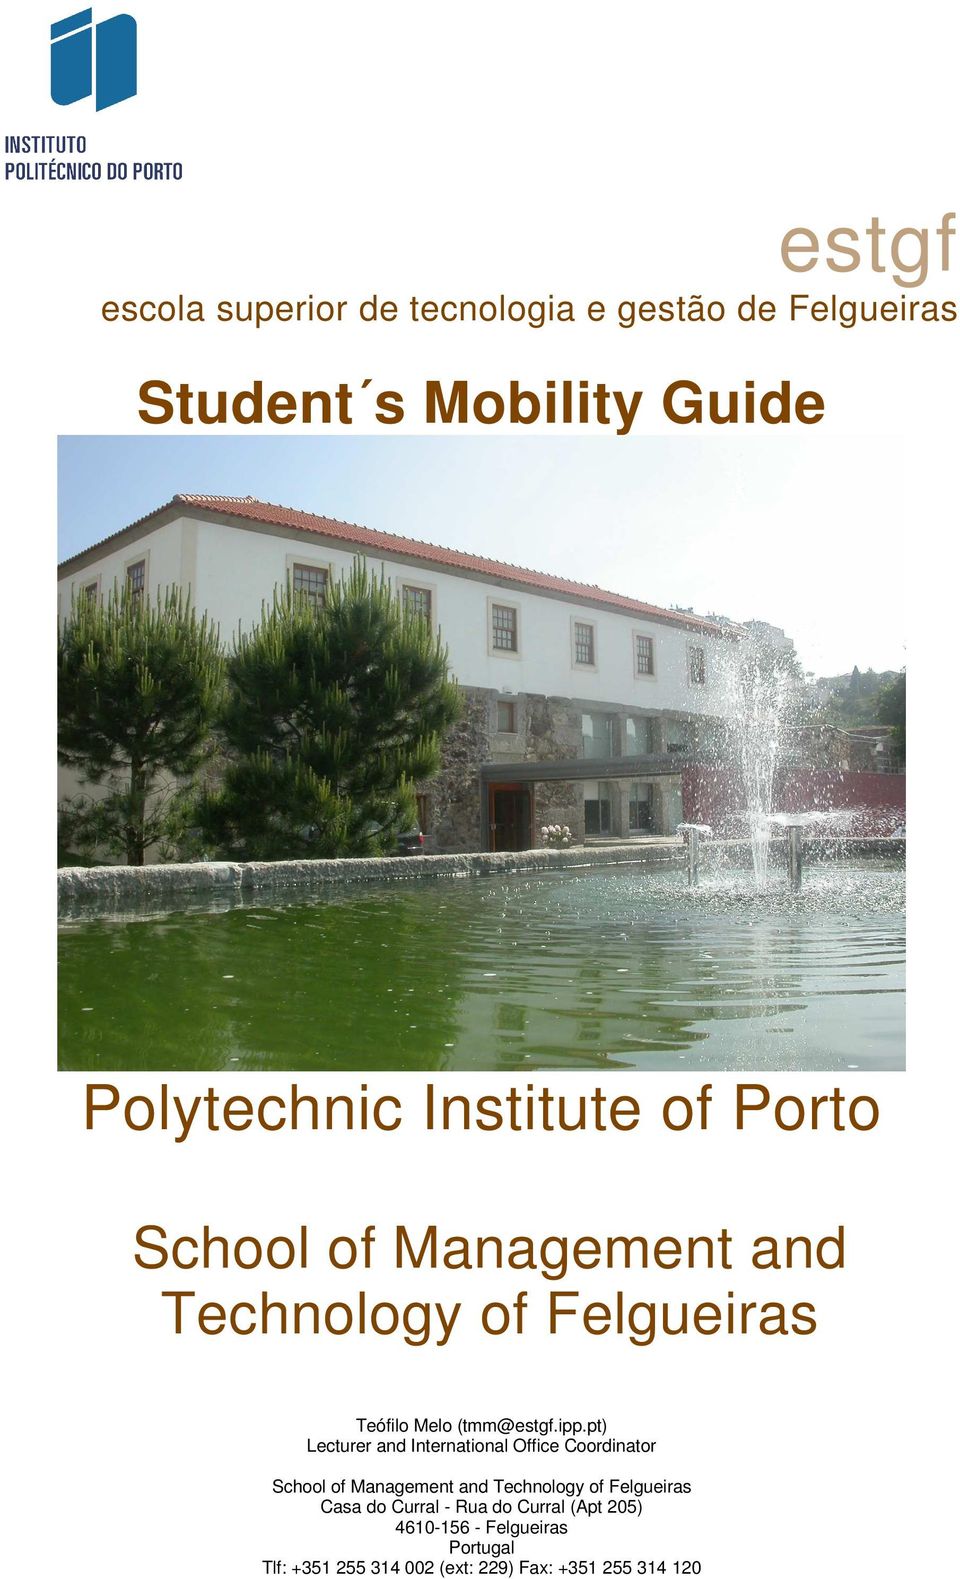 pt) Lecturer and International Office Coordinator School of Management and Technology of